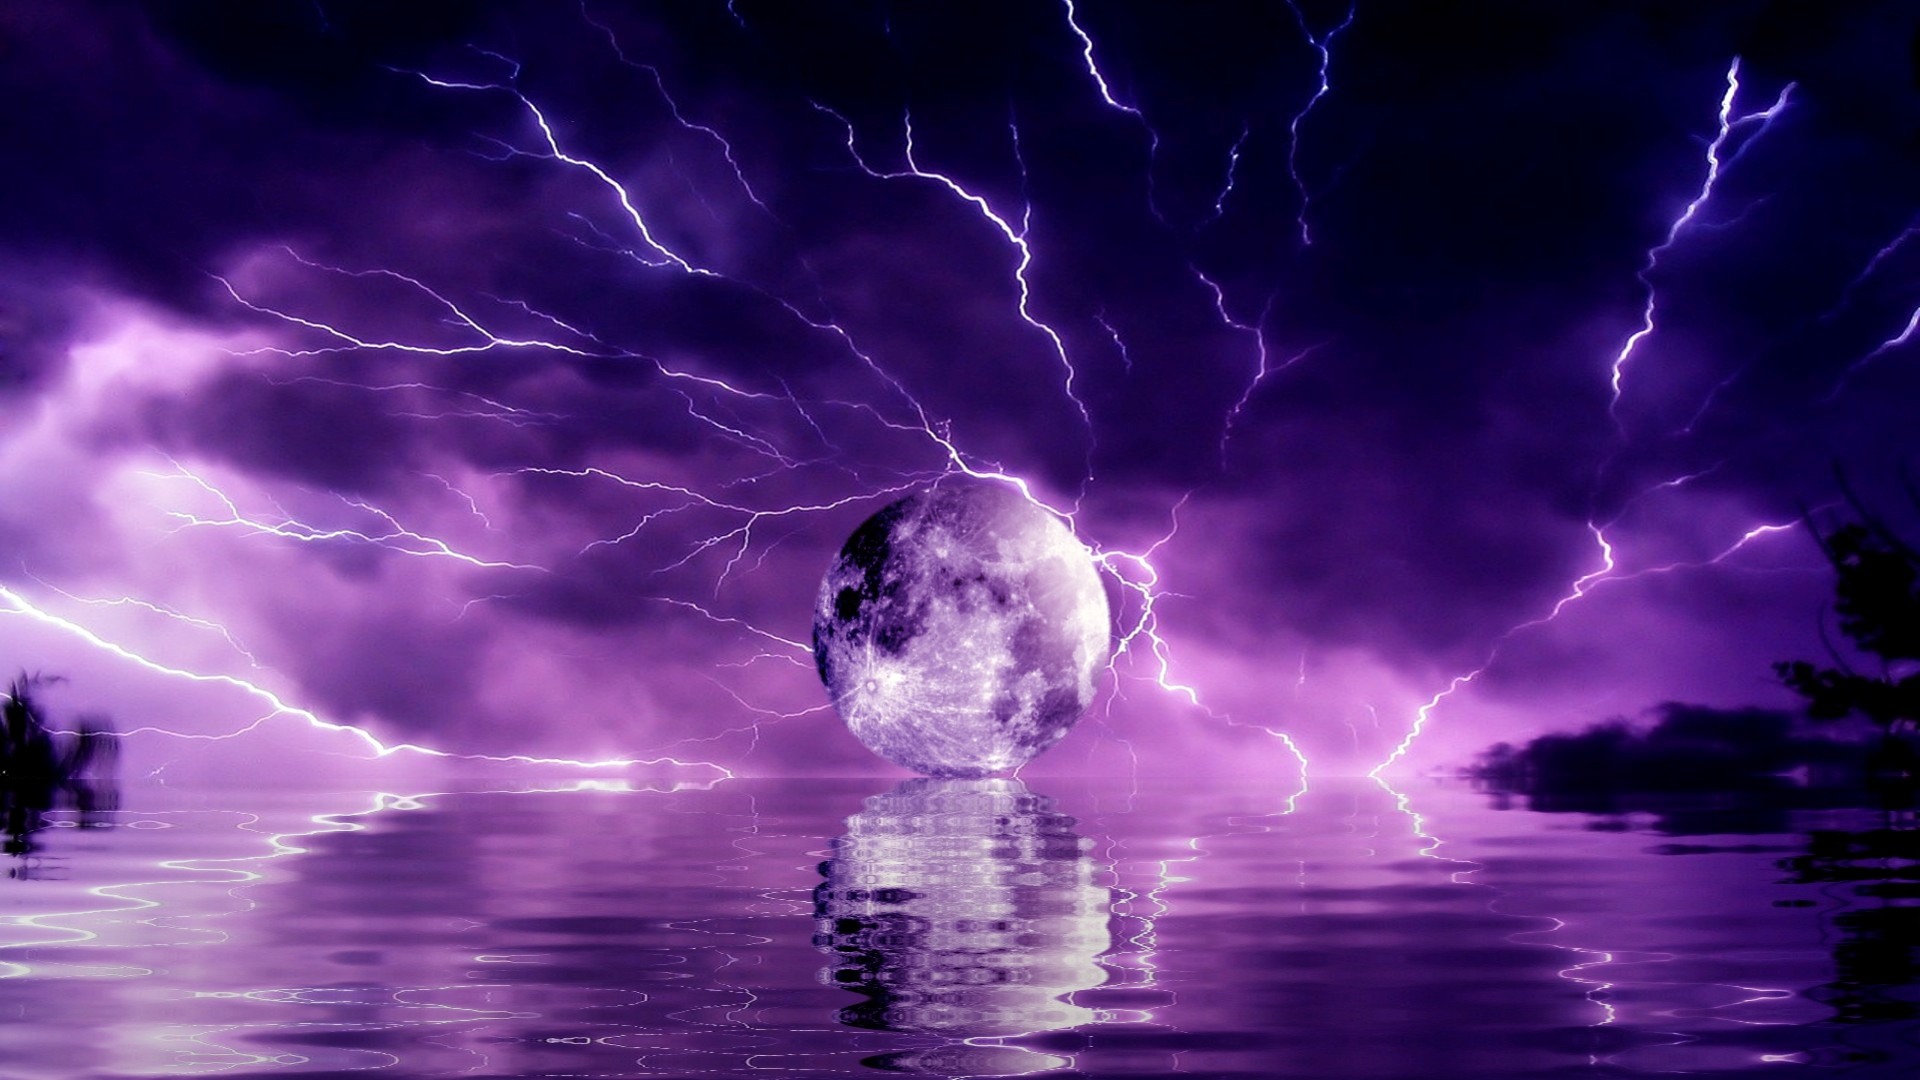 Animated Storm Wallpaper Photos Cool Natural Background